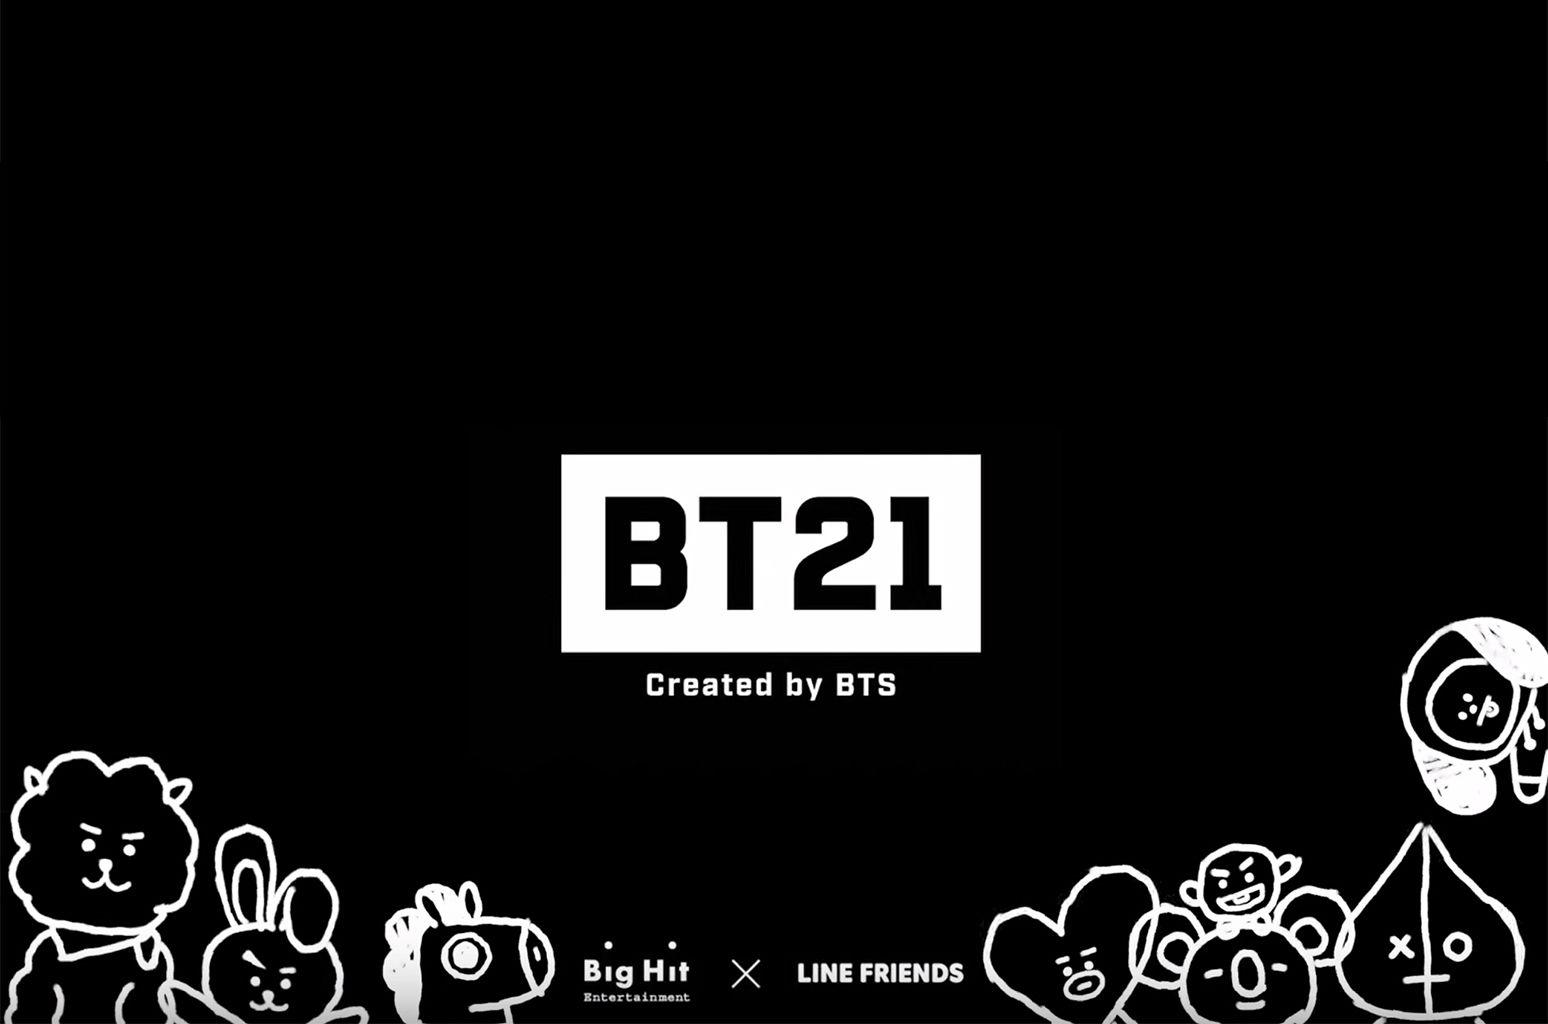 BTS Emoji Collection: Preview Their BT21 Animated Character Designs